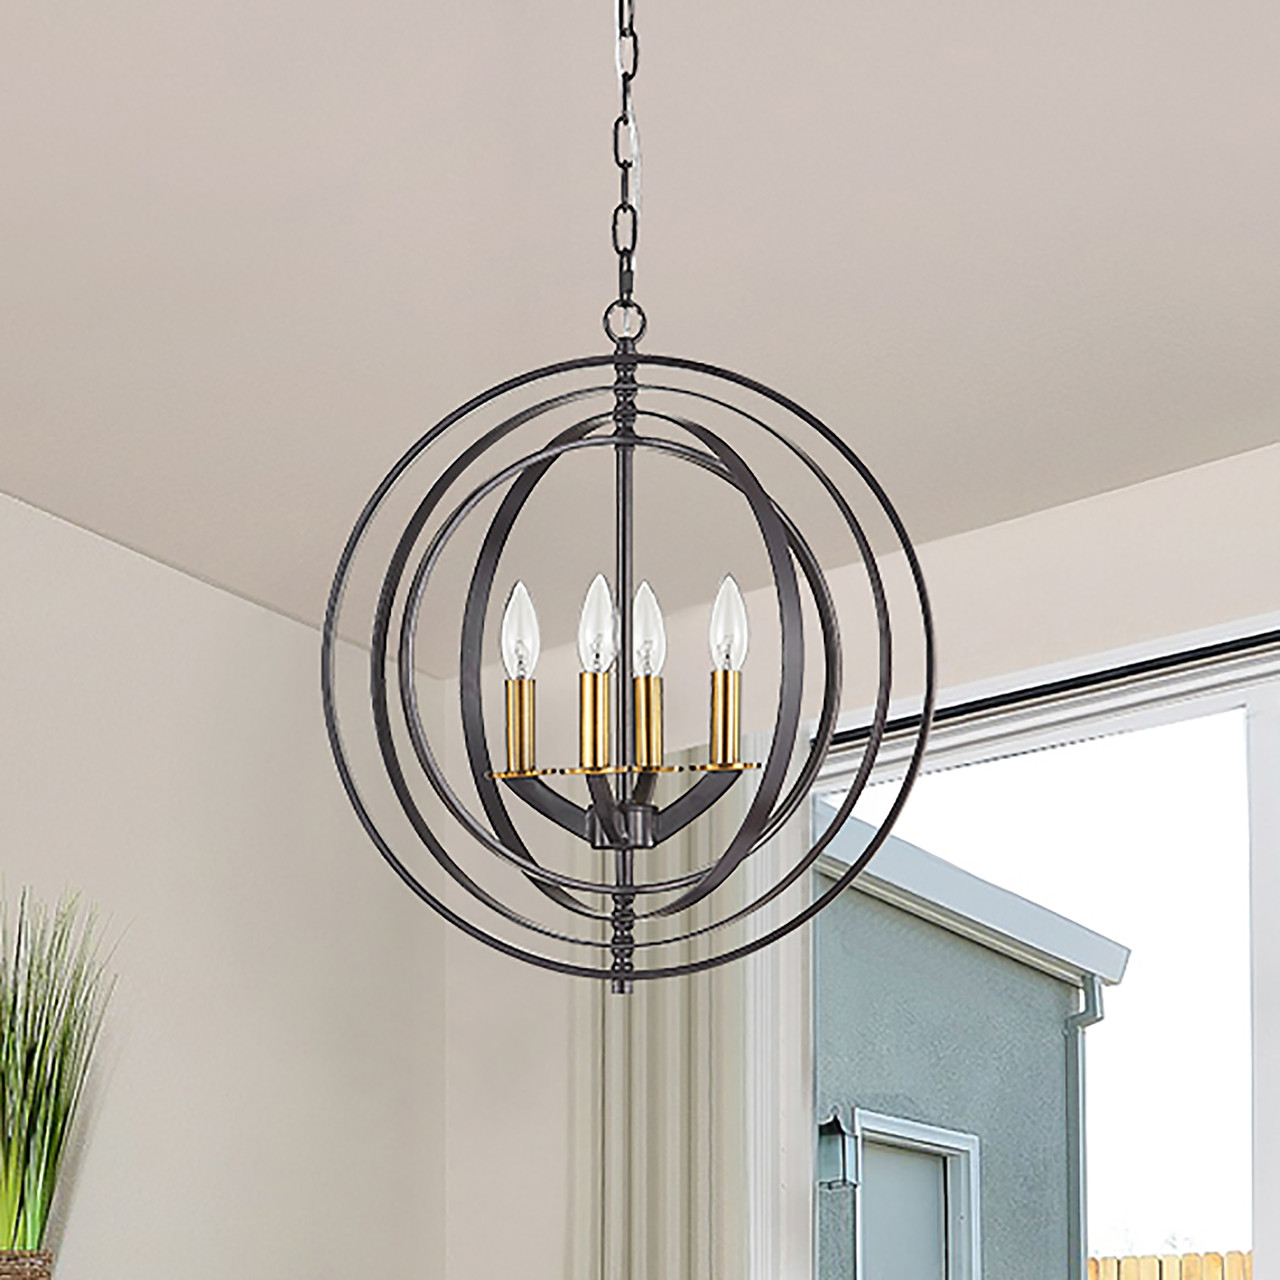 WAREHOUSE OF TIFFANY'S P2222-4 Jayce 18 in. 4-Light Indoor Bronze and Gold Finish Chandelier with Light Kit